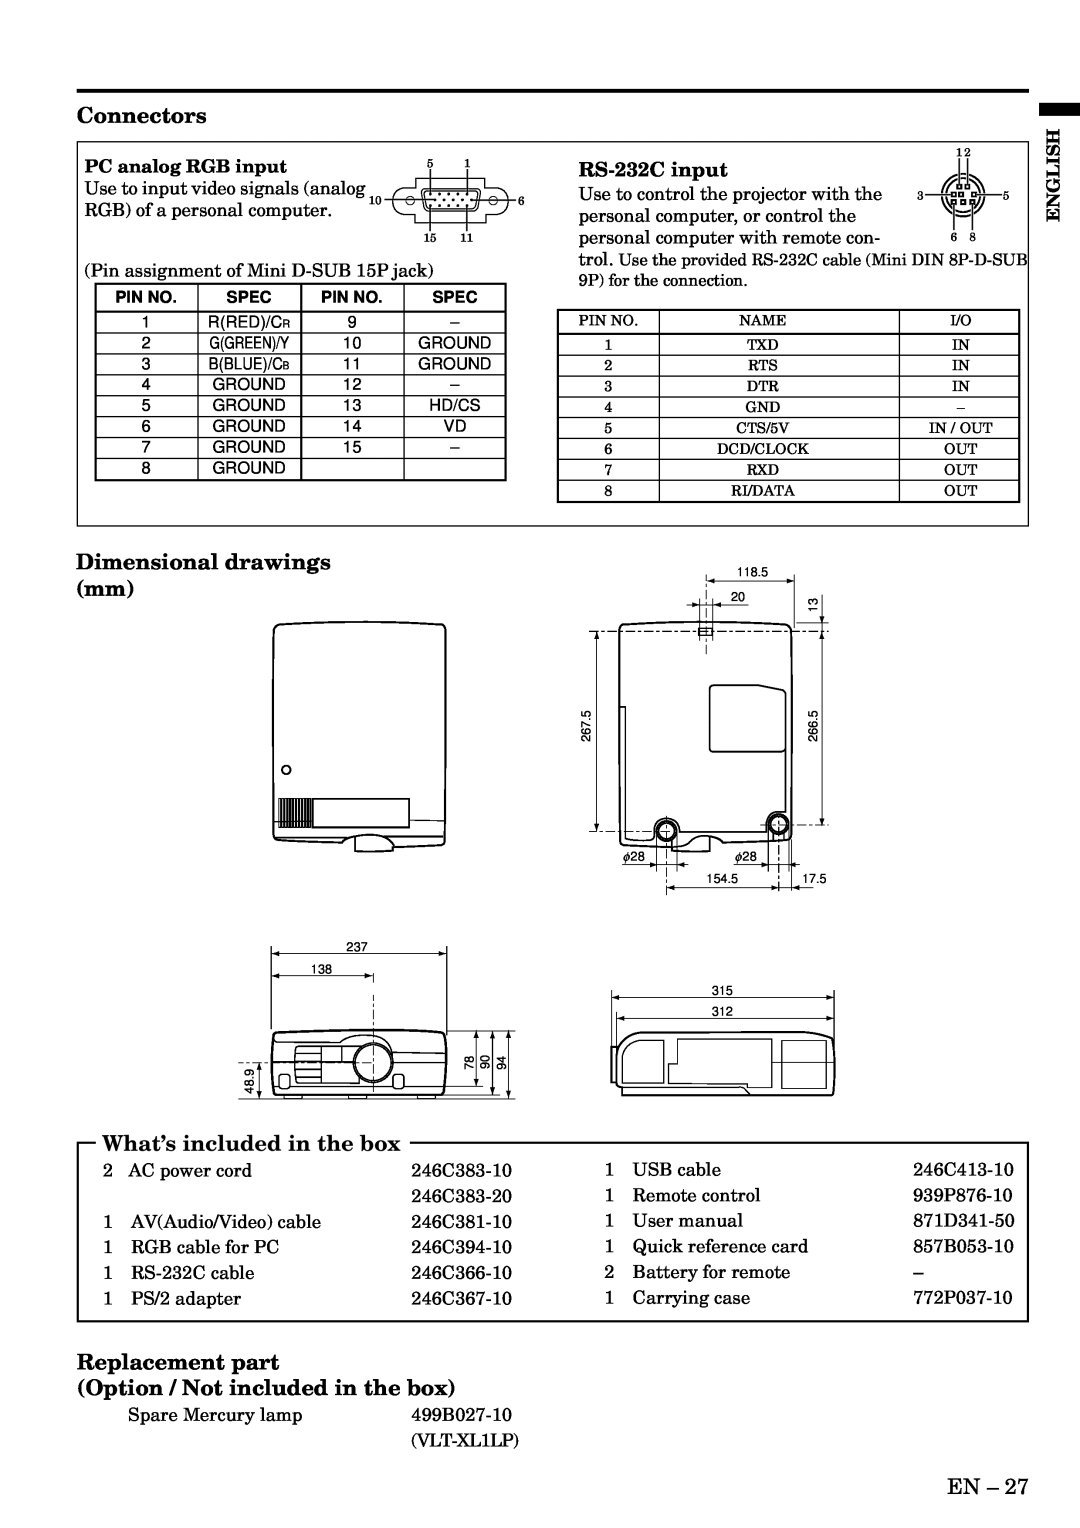 Mitsubishi Electronics XL1U Connectors, Dimensional drawings mm, What’s included in the box, Replacement part, English 